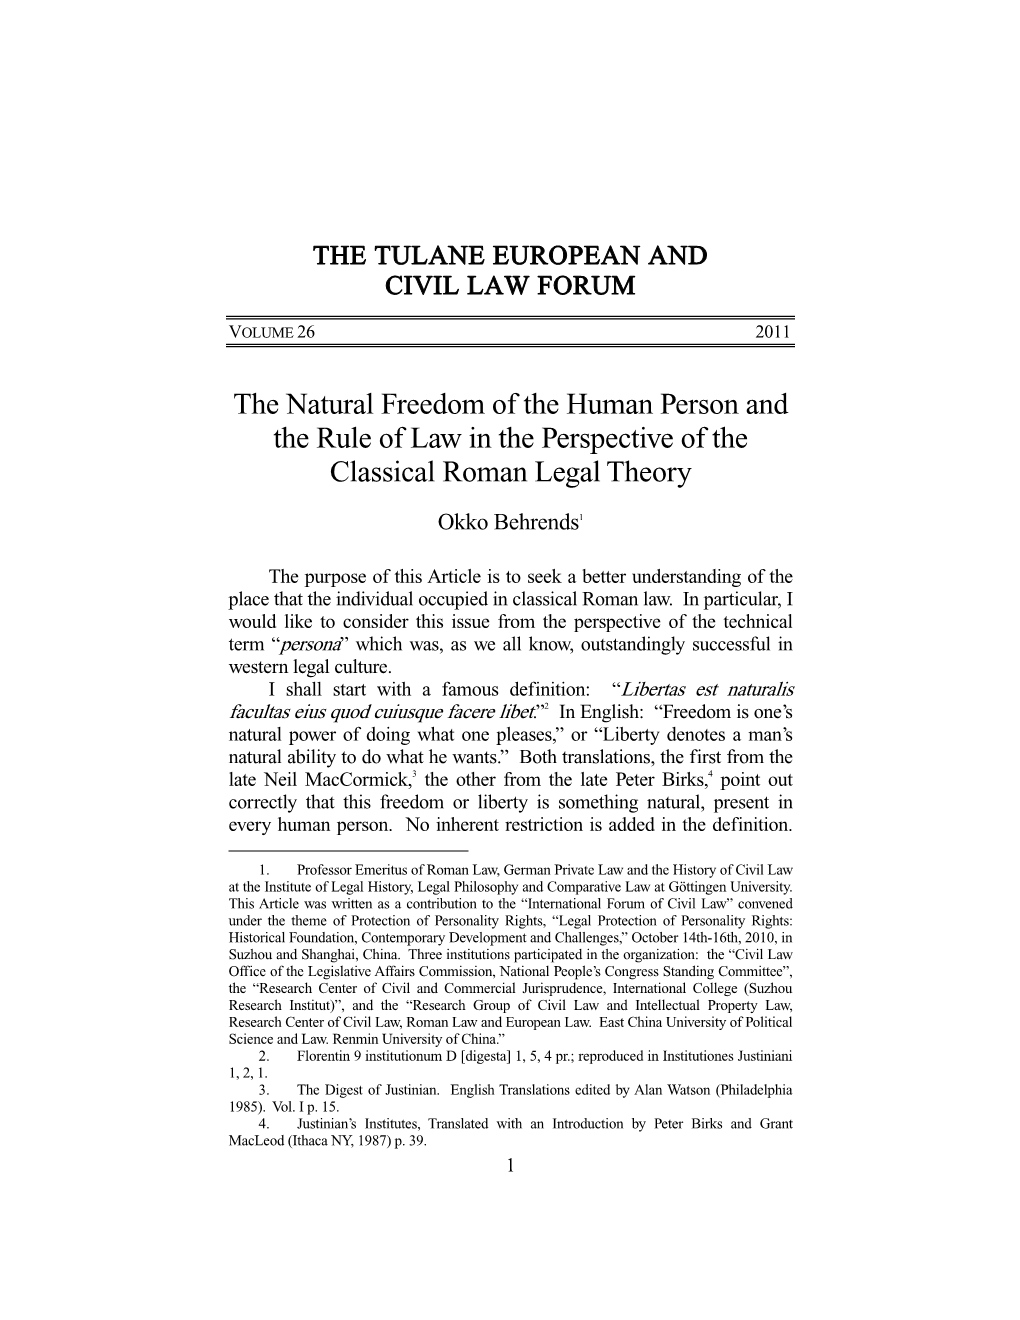 The Natural Freedom of the Human Person and the Rule of Law in the Perspective of the Classical Roman Legal Theory